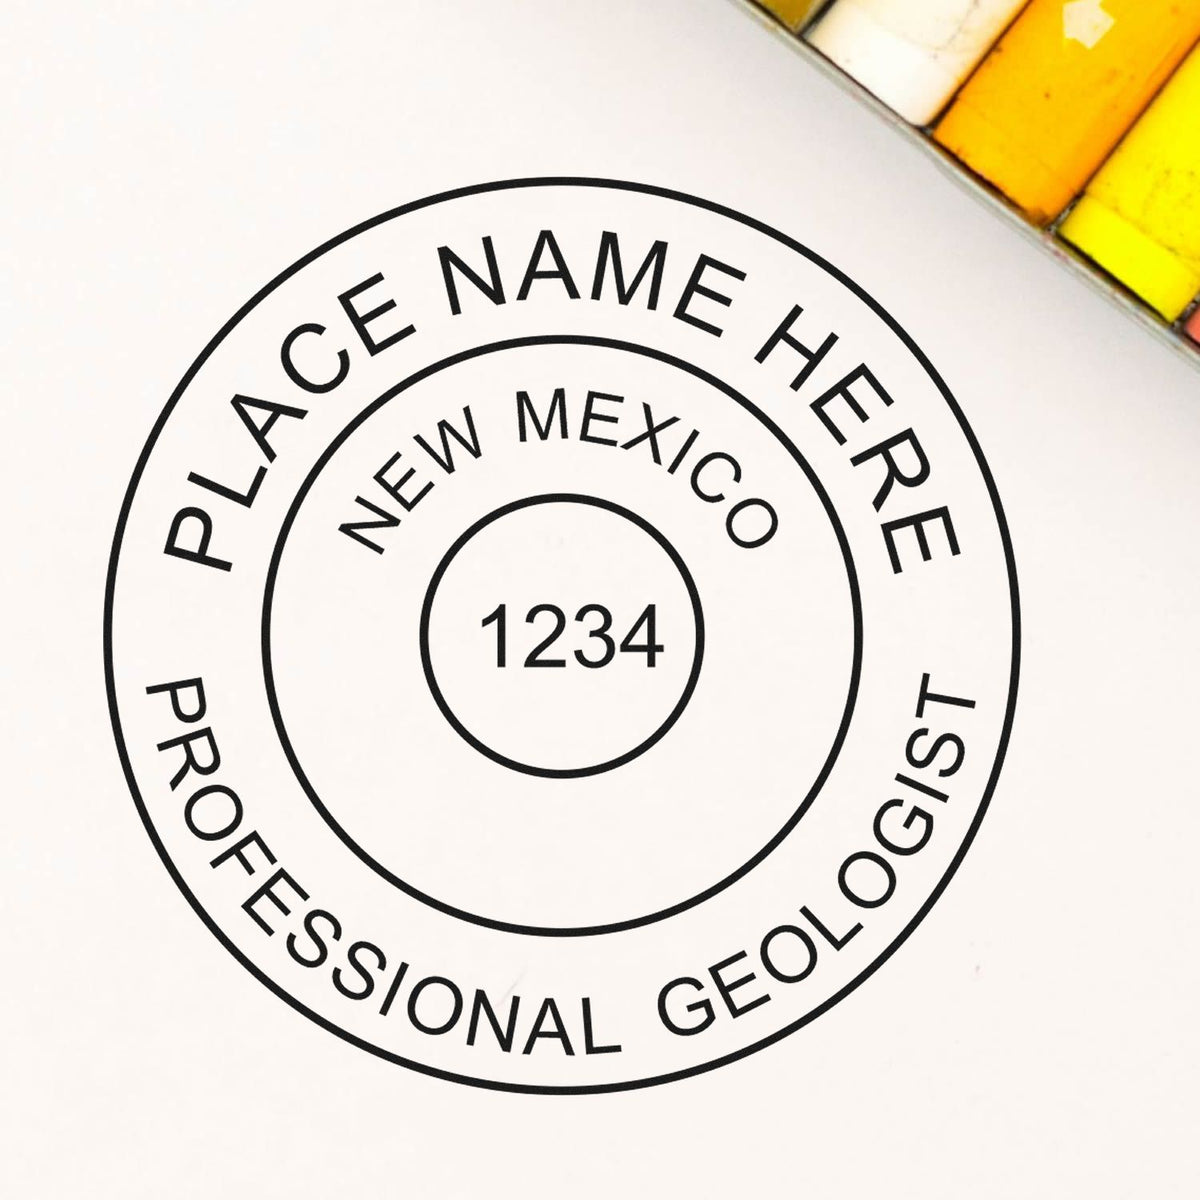 A photograph of the New Mexico Professional Geologist Seal Stamp stamp impression reveals a vivid, professional image of the on paper.